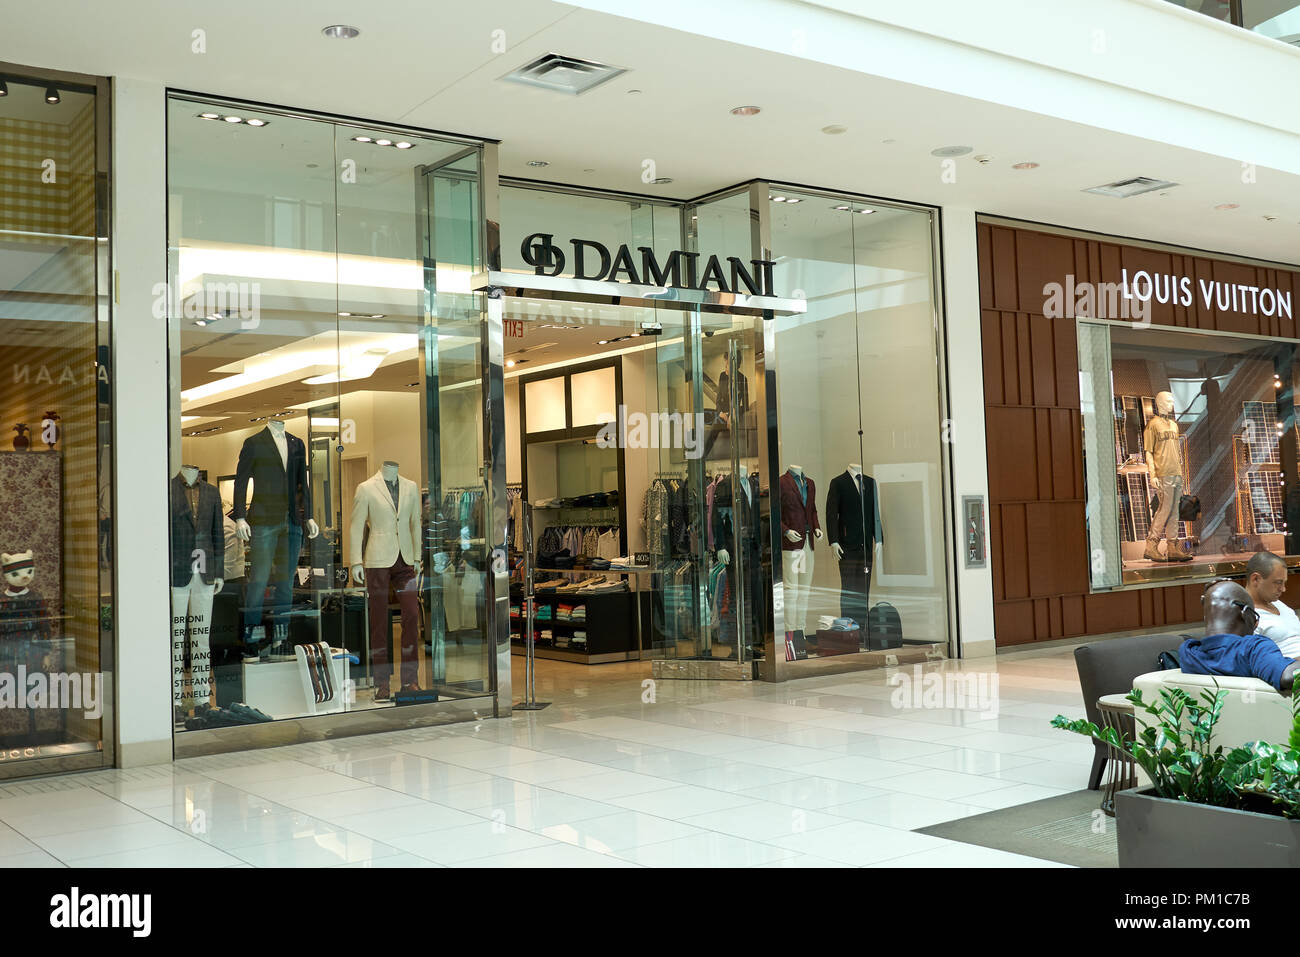 AVENTURA, USA - AUGUST 23, 2018: Damiani famous boutique in Aventura Mall. Damiani is an Italian luxury jewelry corporate group that designs, manufact Stock Photo